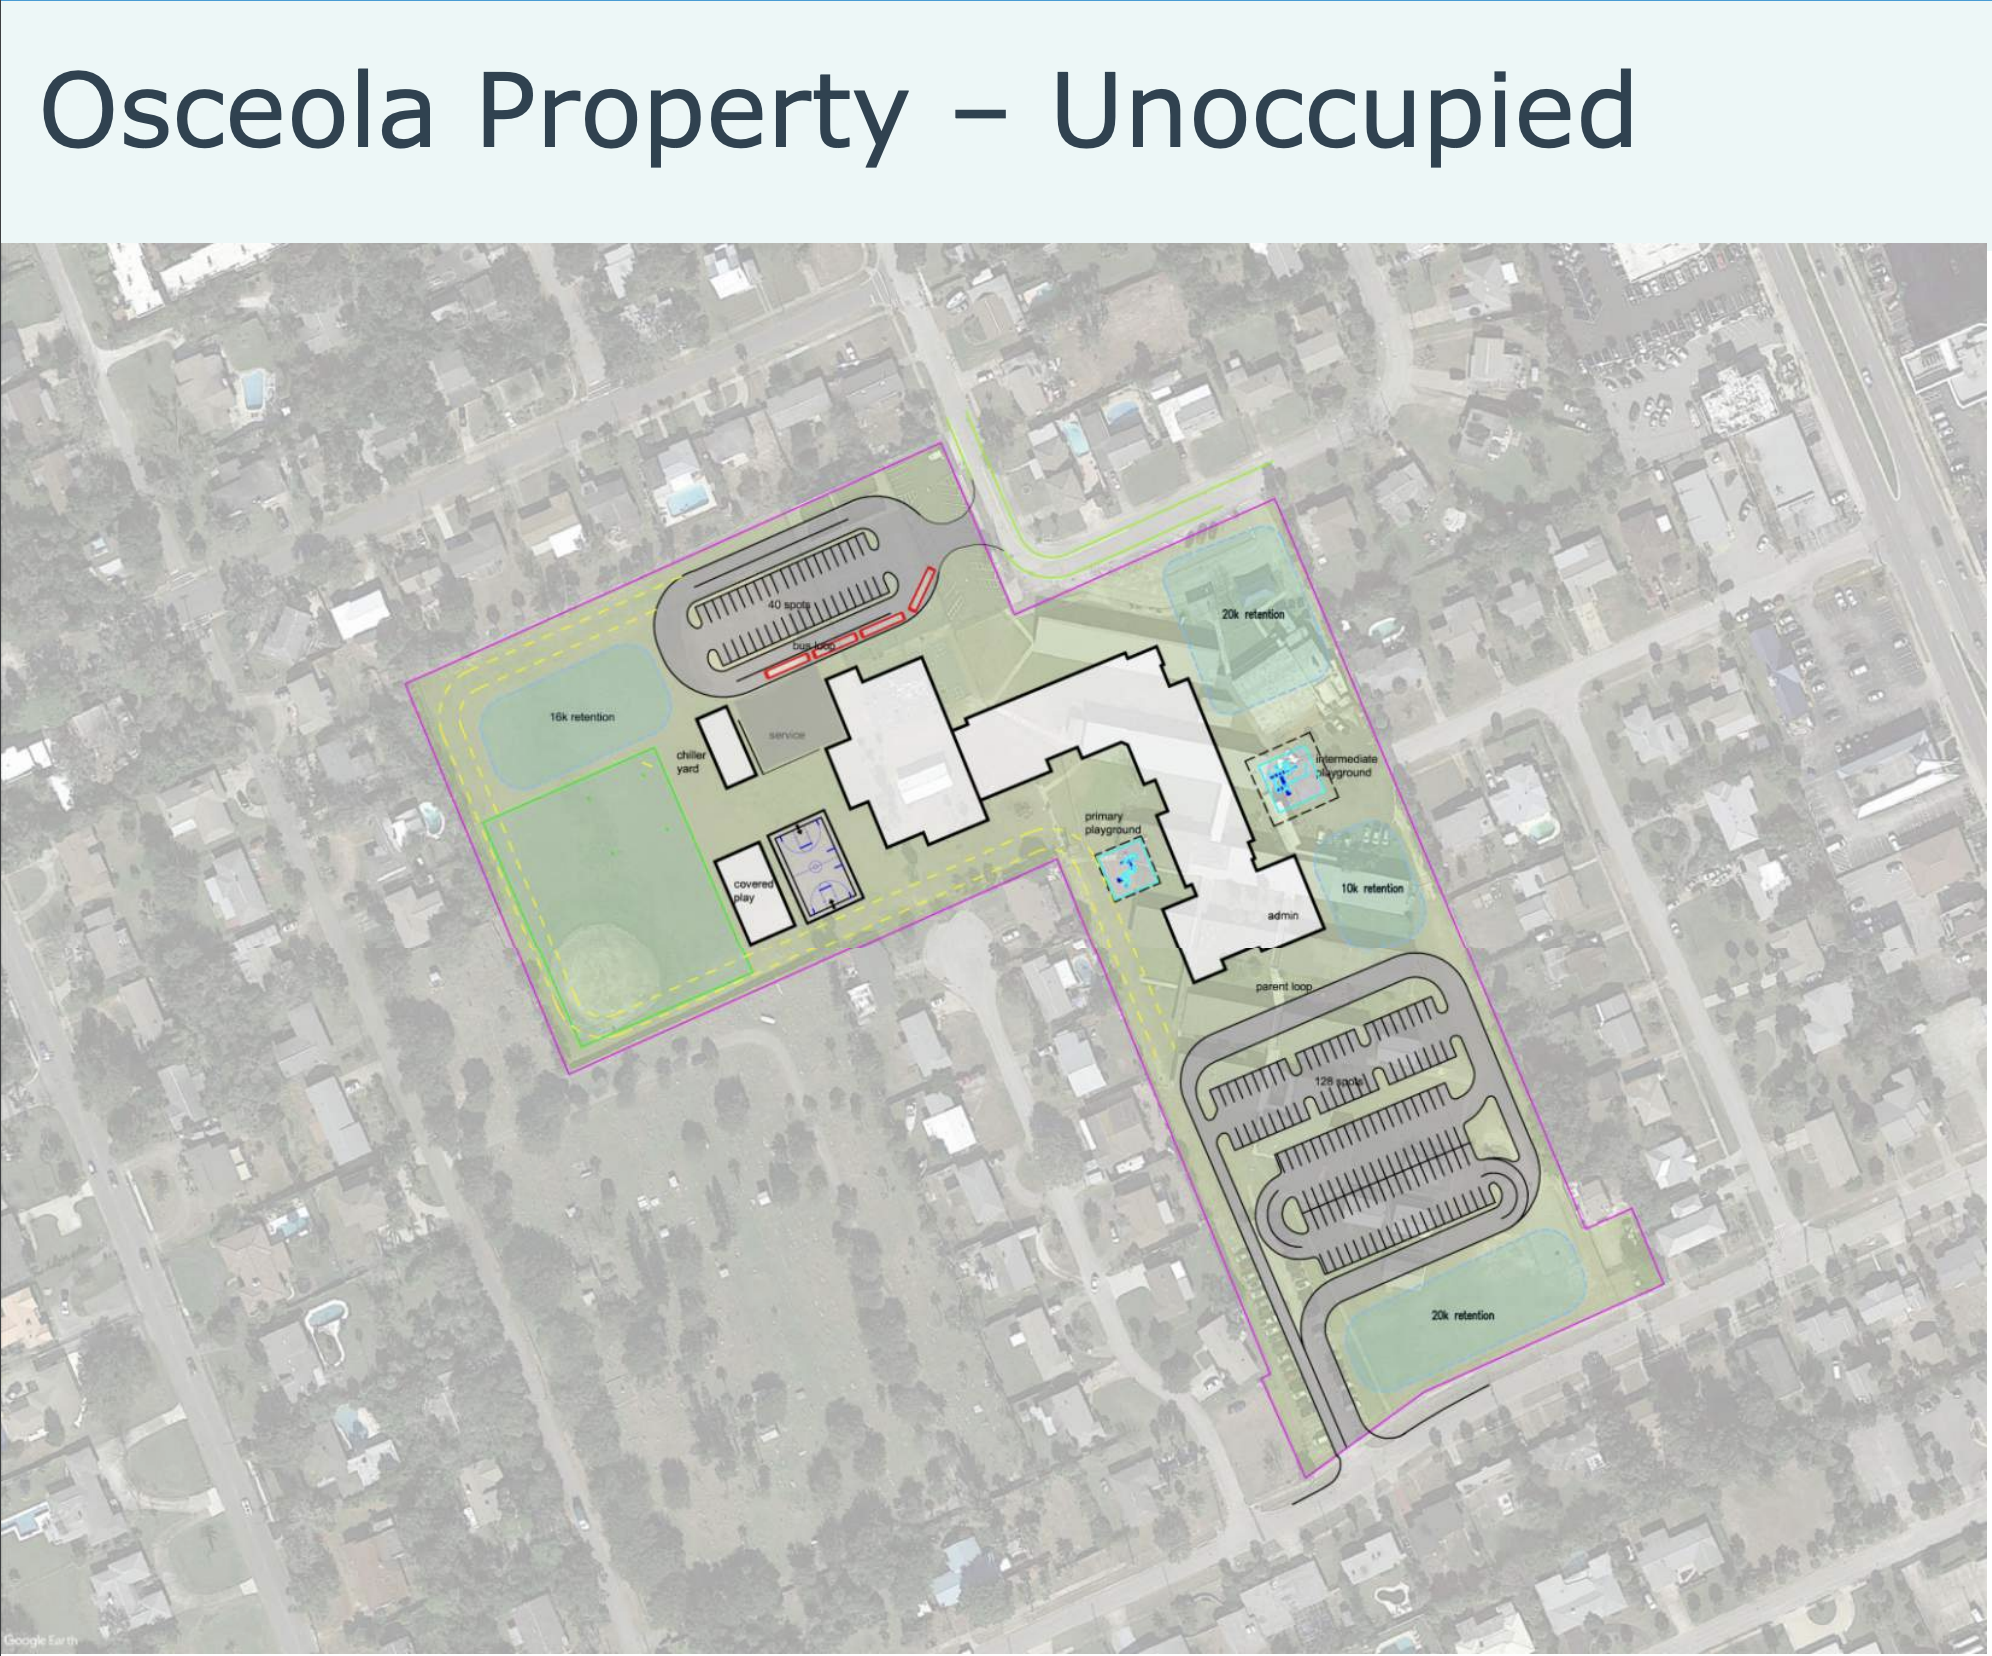 A plan showing what building on an unoccupied campus at Osceola would look like. Courtesy of Volusia County Schools/BRPH